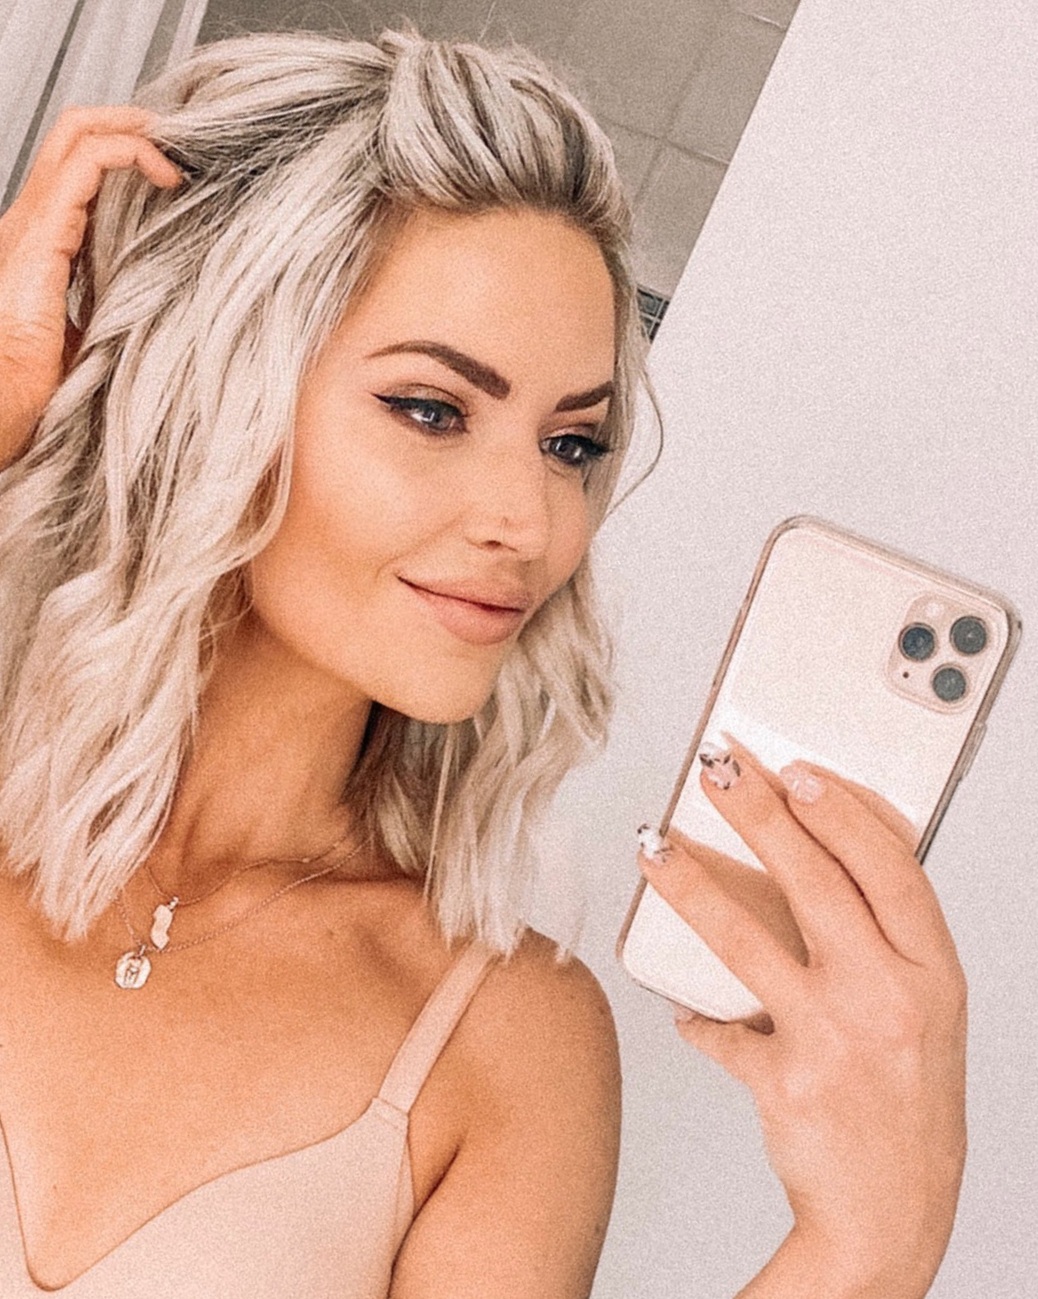 danielle ney recommends iphone 11 mirror selfie girl pic